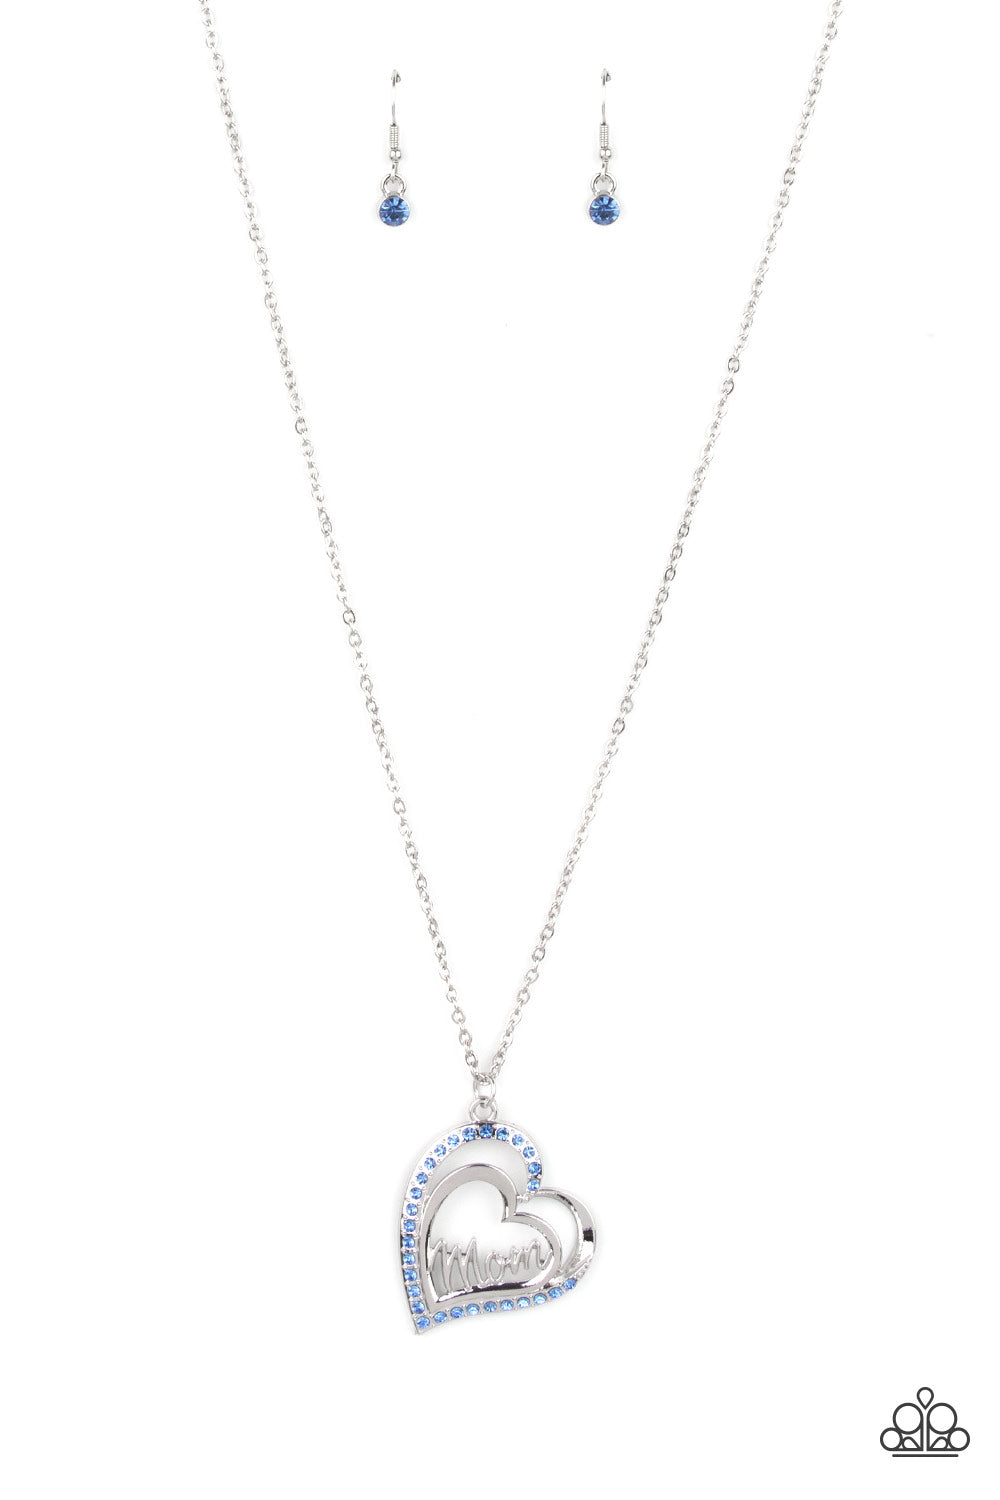 A Mothers Heart Necklace - Blue